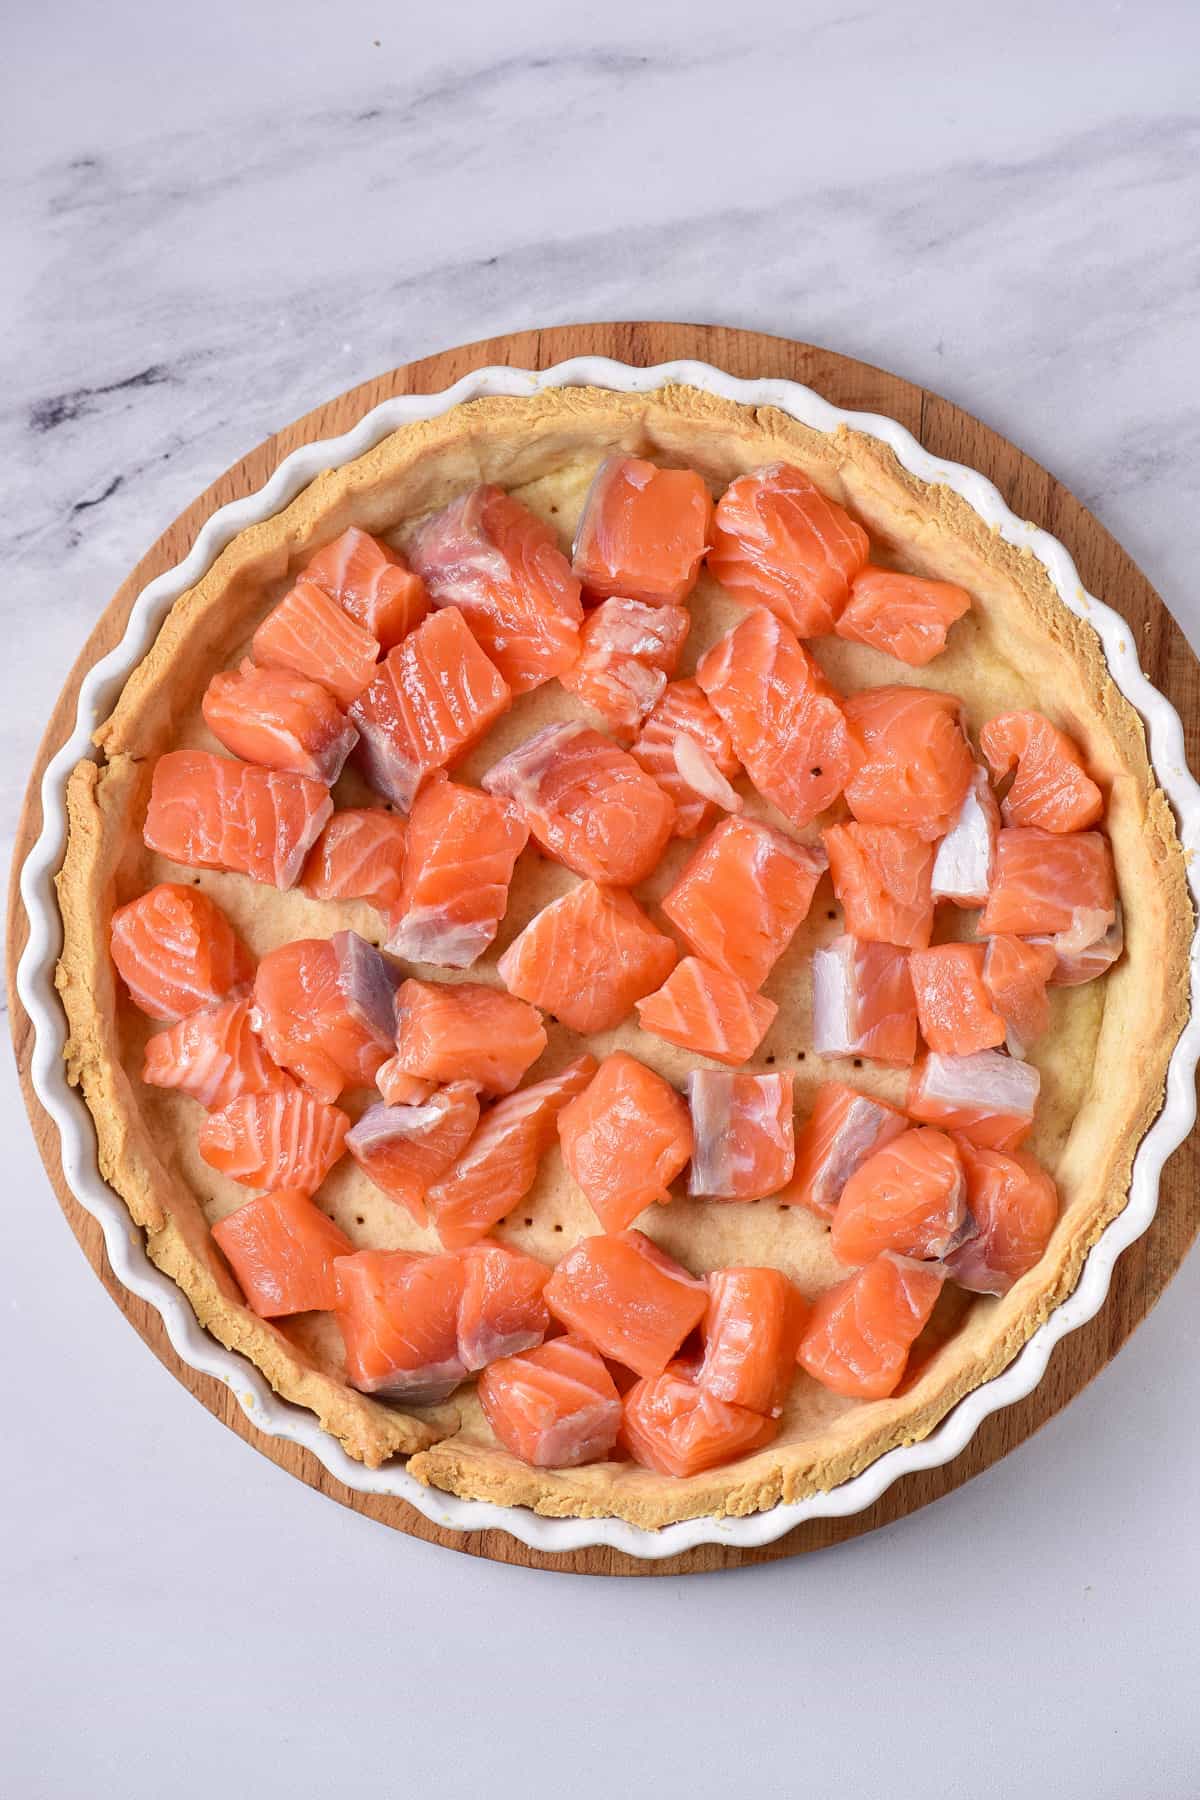 Salmon cubes added to the pastry crust.